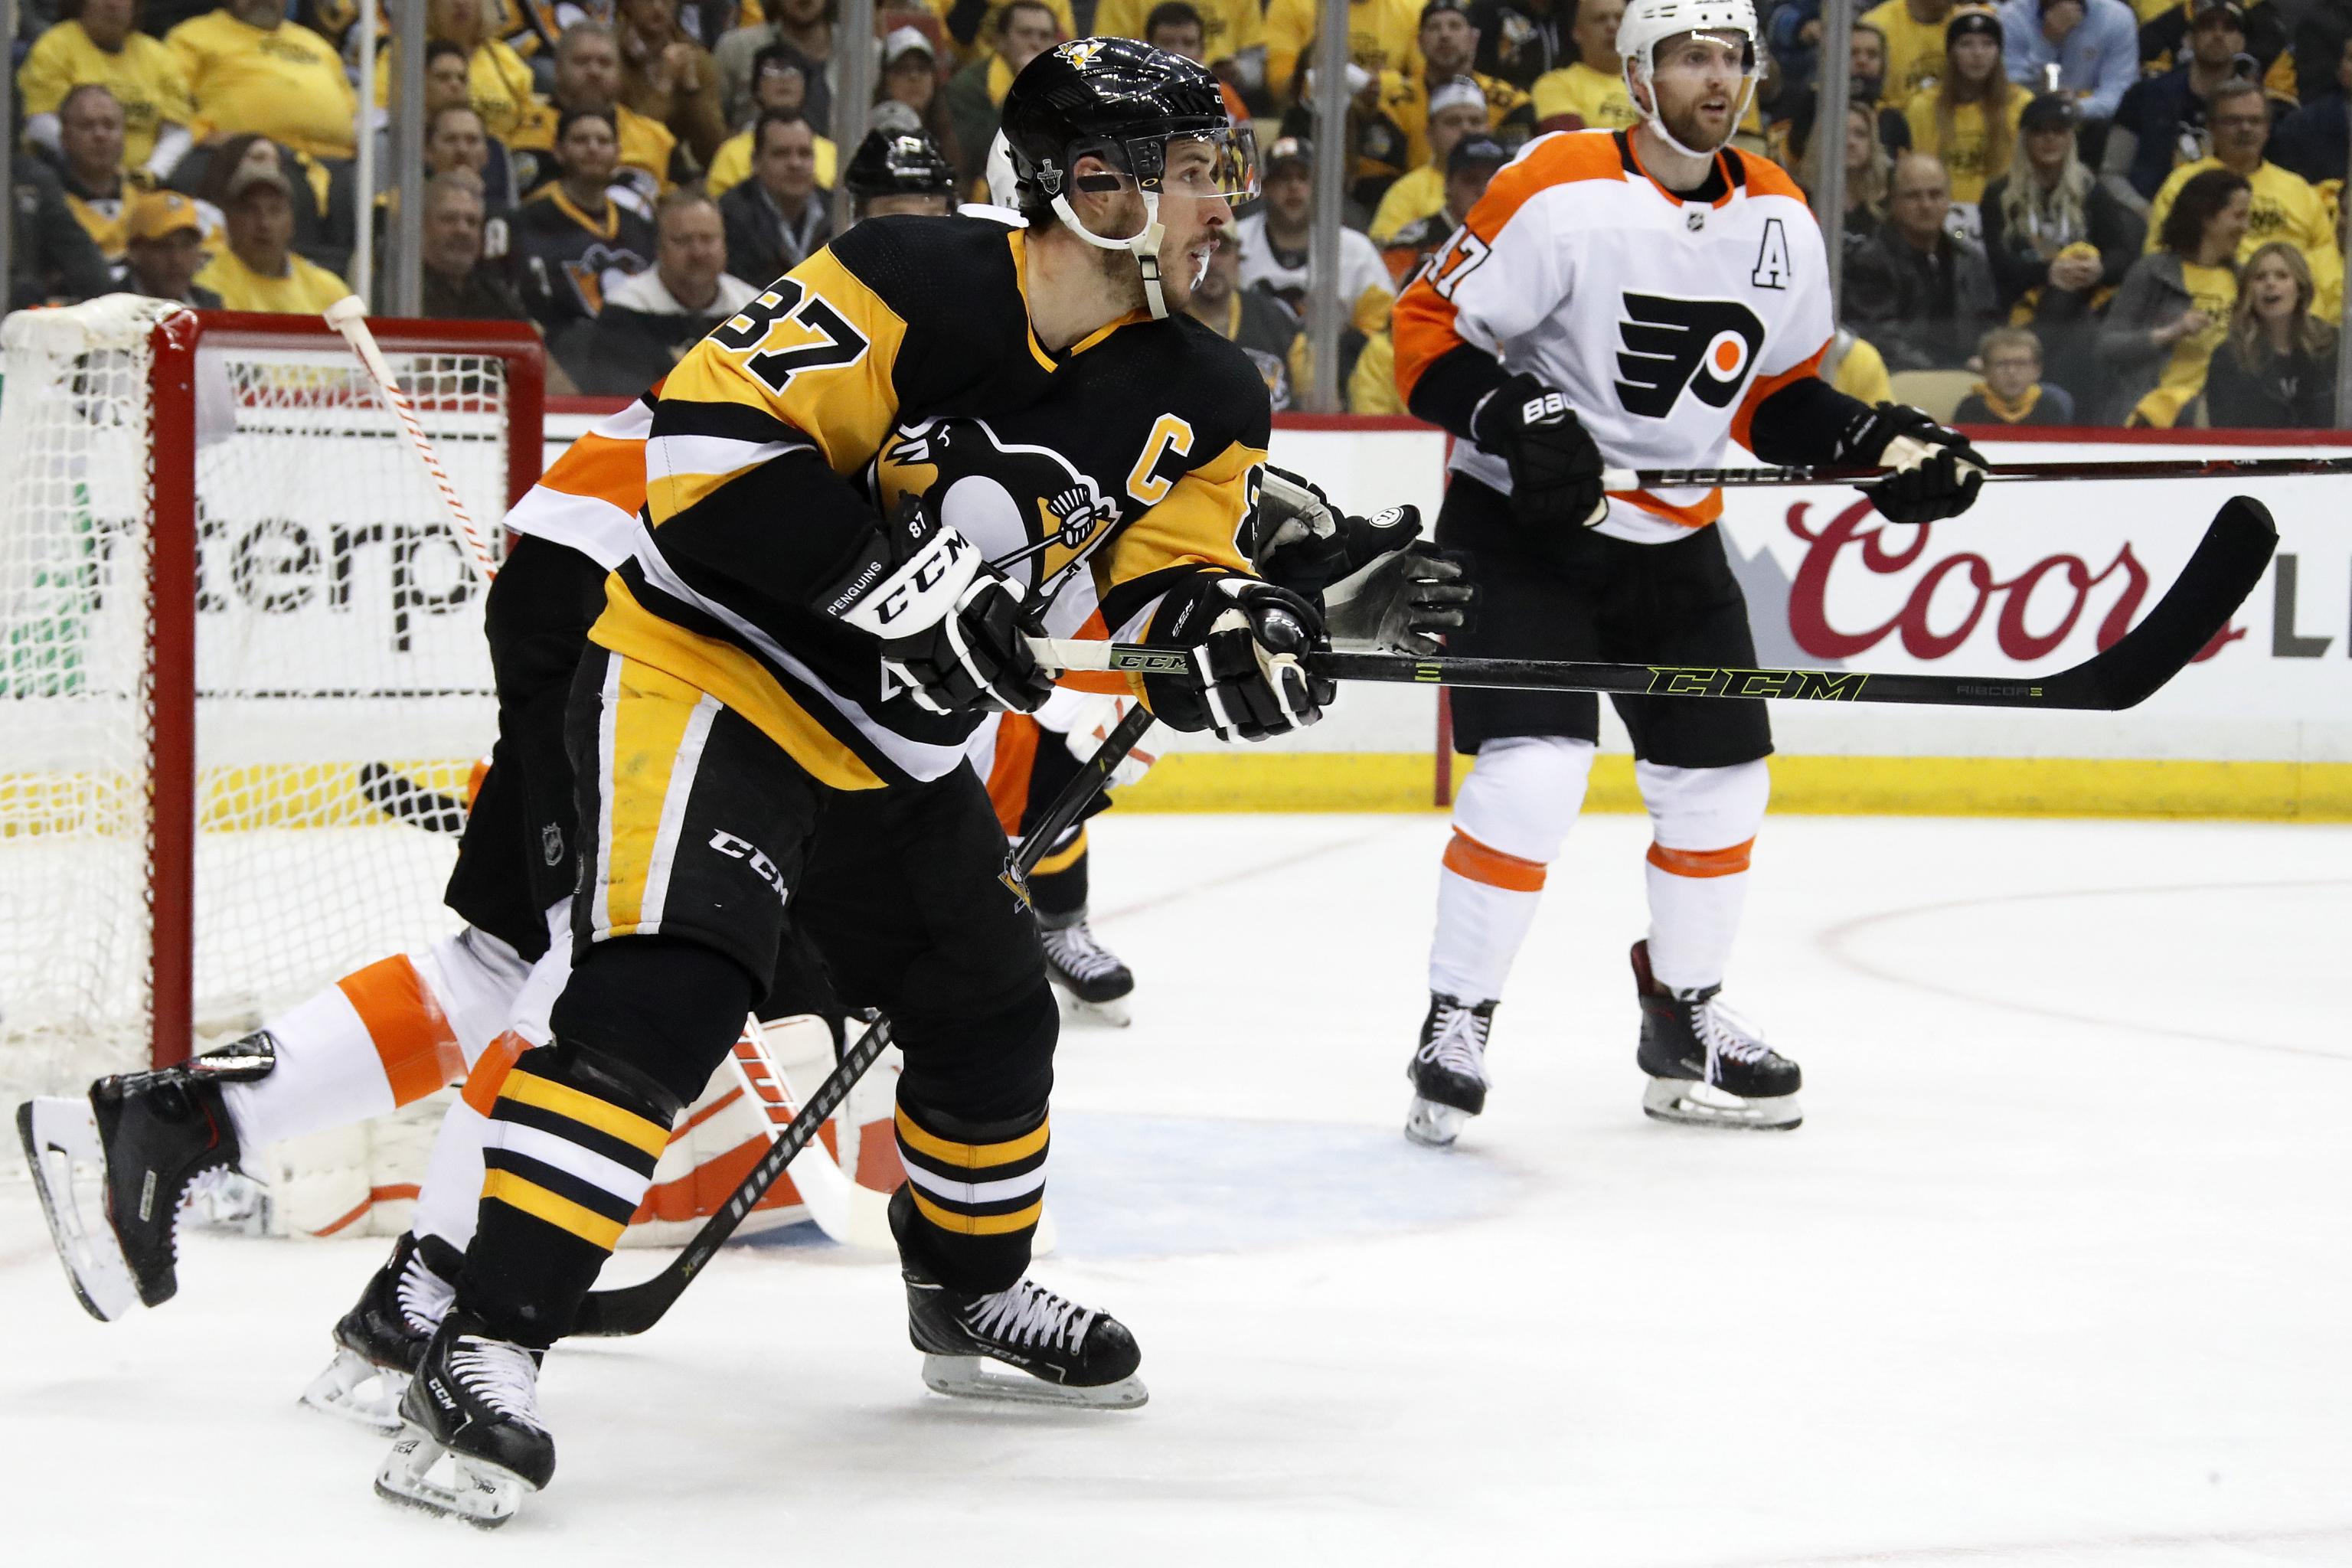 Can the Pittsburgh Penguins three-peat? Is it the Tampa Bay